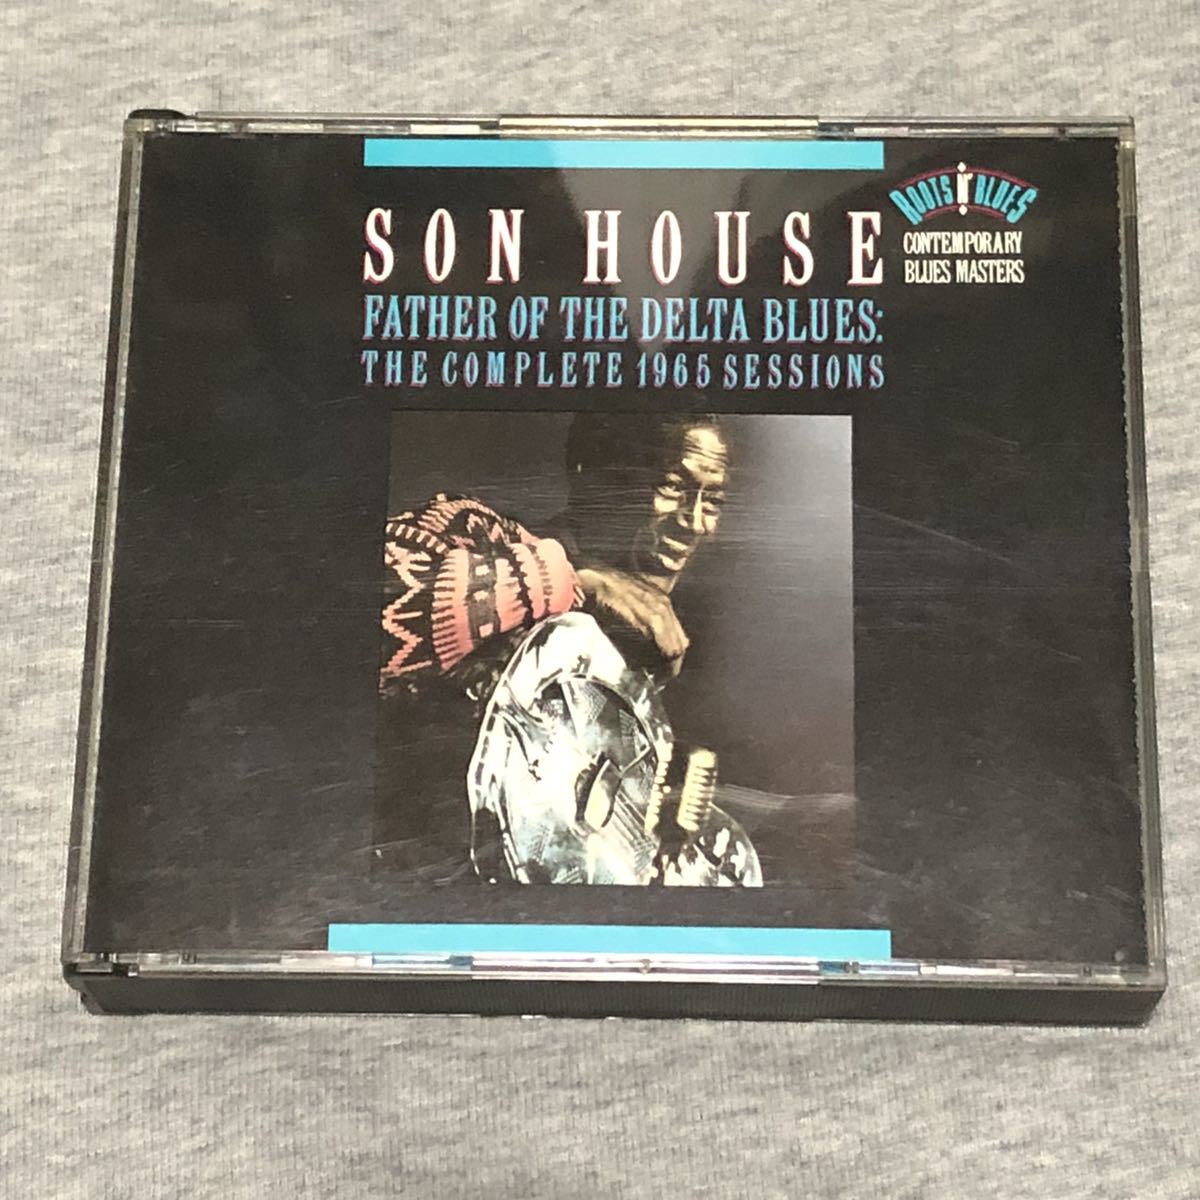 SON HOUSEサン・ハウス「FATHER OF DELTA BLUES THE COMPLETE 1965 SESSIONS」トールケース付！_画像1